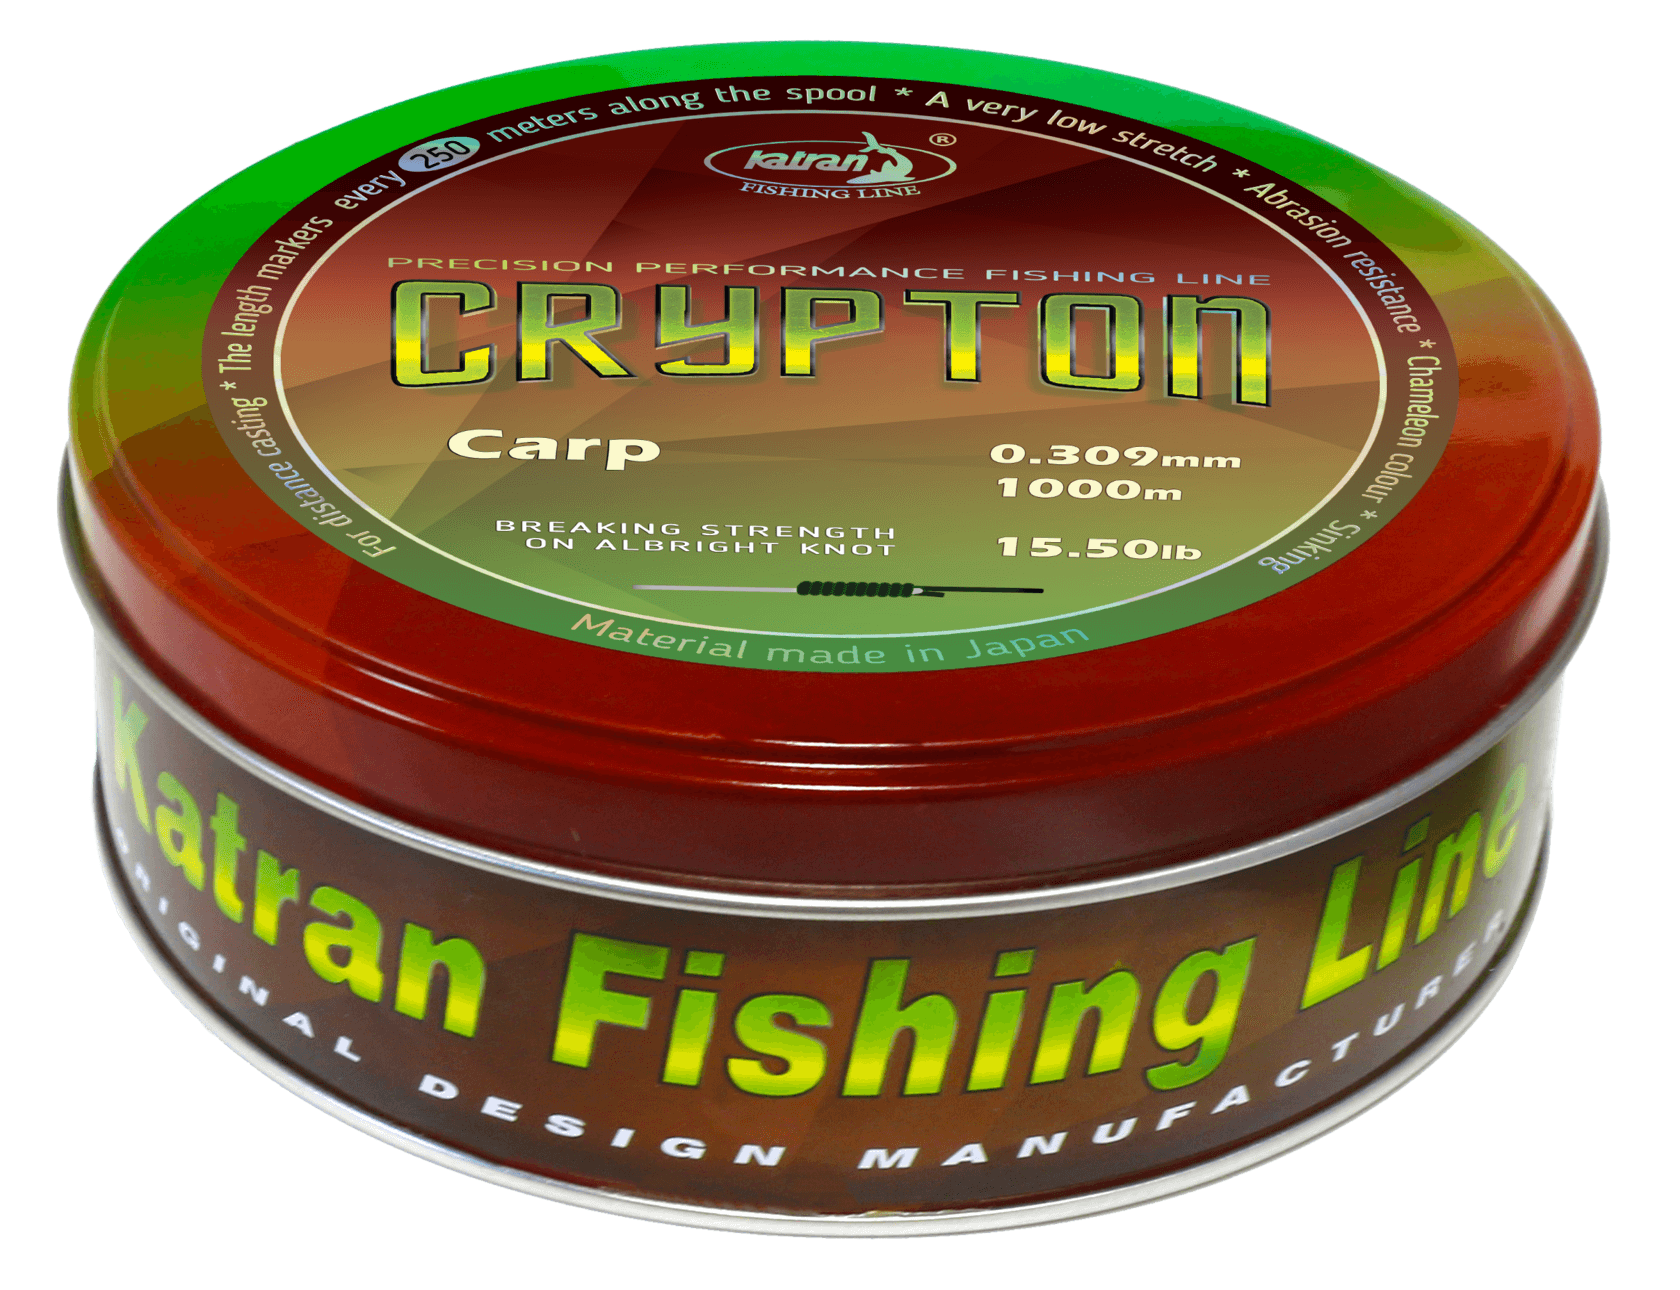 Katran Fishing Line - Your ultimate night fishing performance with